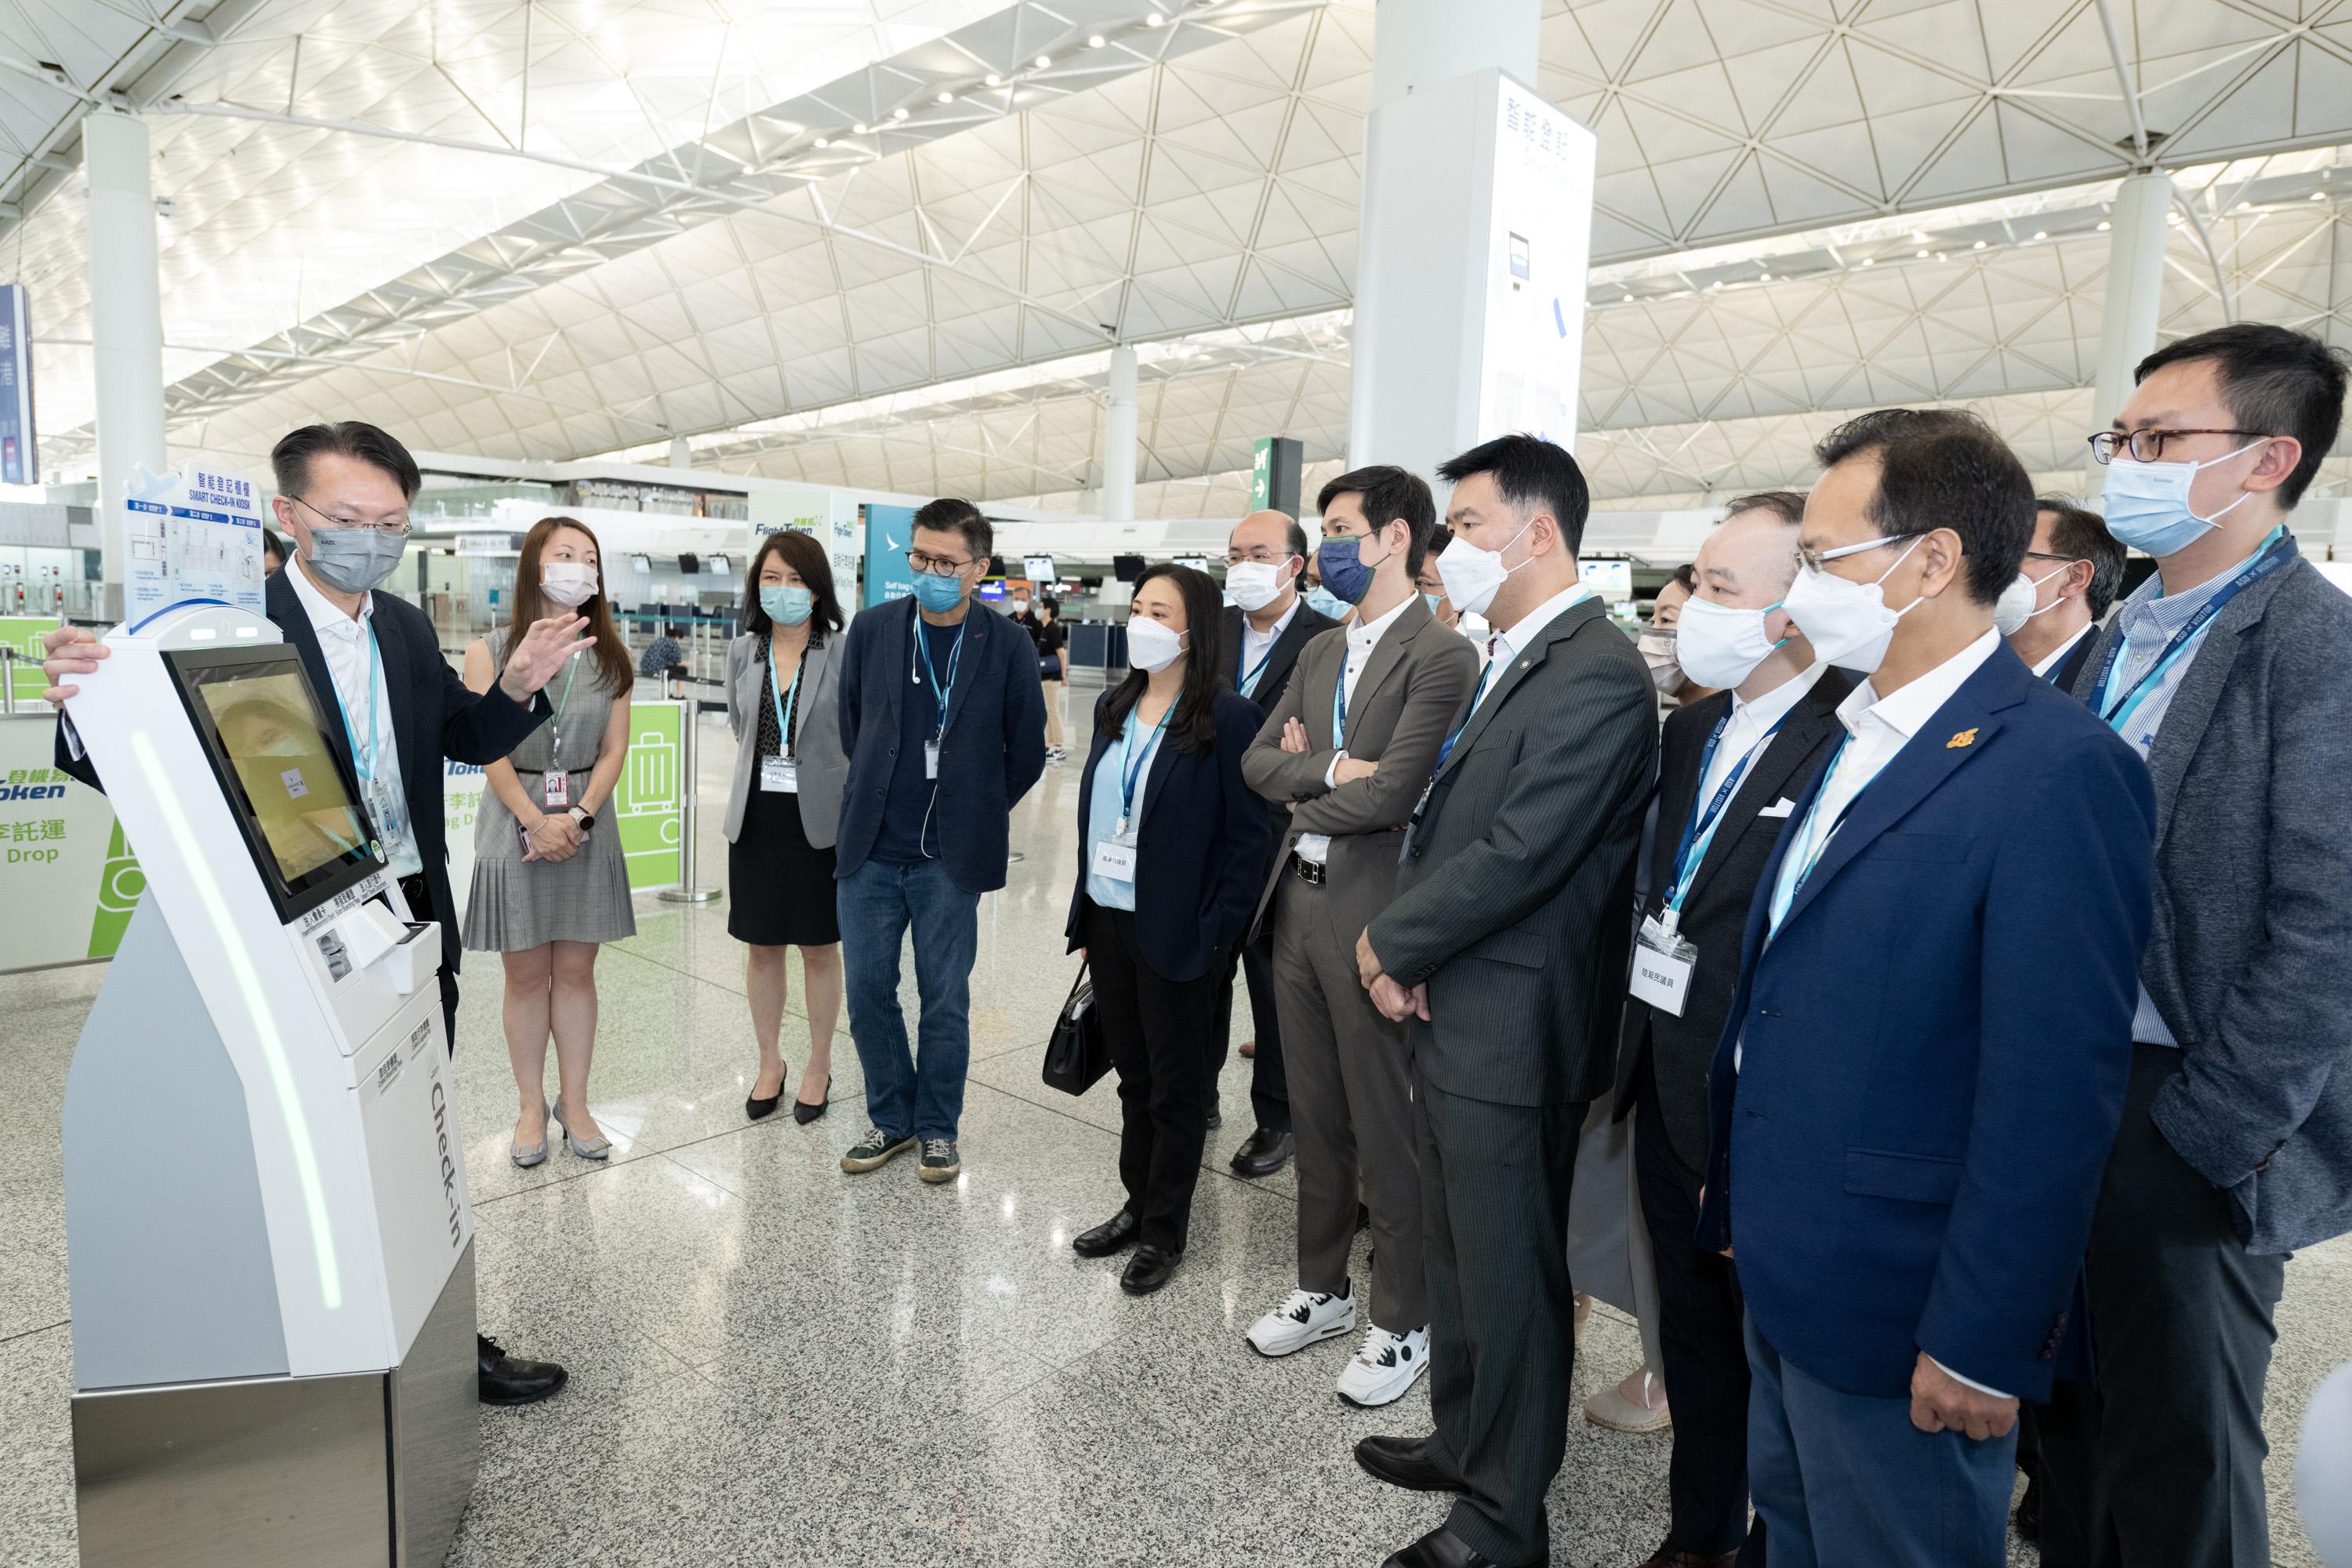 The Legislative Council (LegCo) Subcommittee on Matters Relating to the Development of Smart City visited the Hong Kong International Airport (HKIA) today (August 8). Photo shows the Chairman of the Subcommittee, Ms Elizabeth Quat (fifth left), the Deputy Chairman of the Subcommittee, Dr Johnny Ng (seventh left), and other LegCo Members observed the Smart Check-in Kiosks at Terminal 1 of the HKIA.